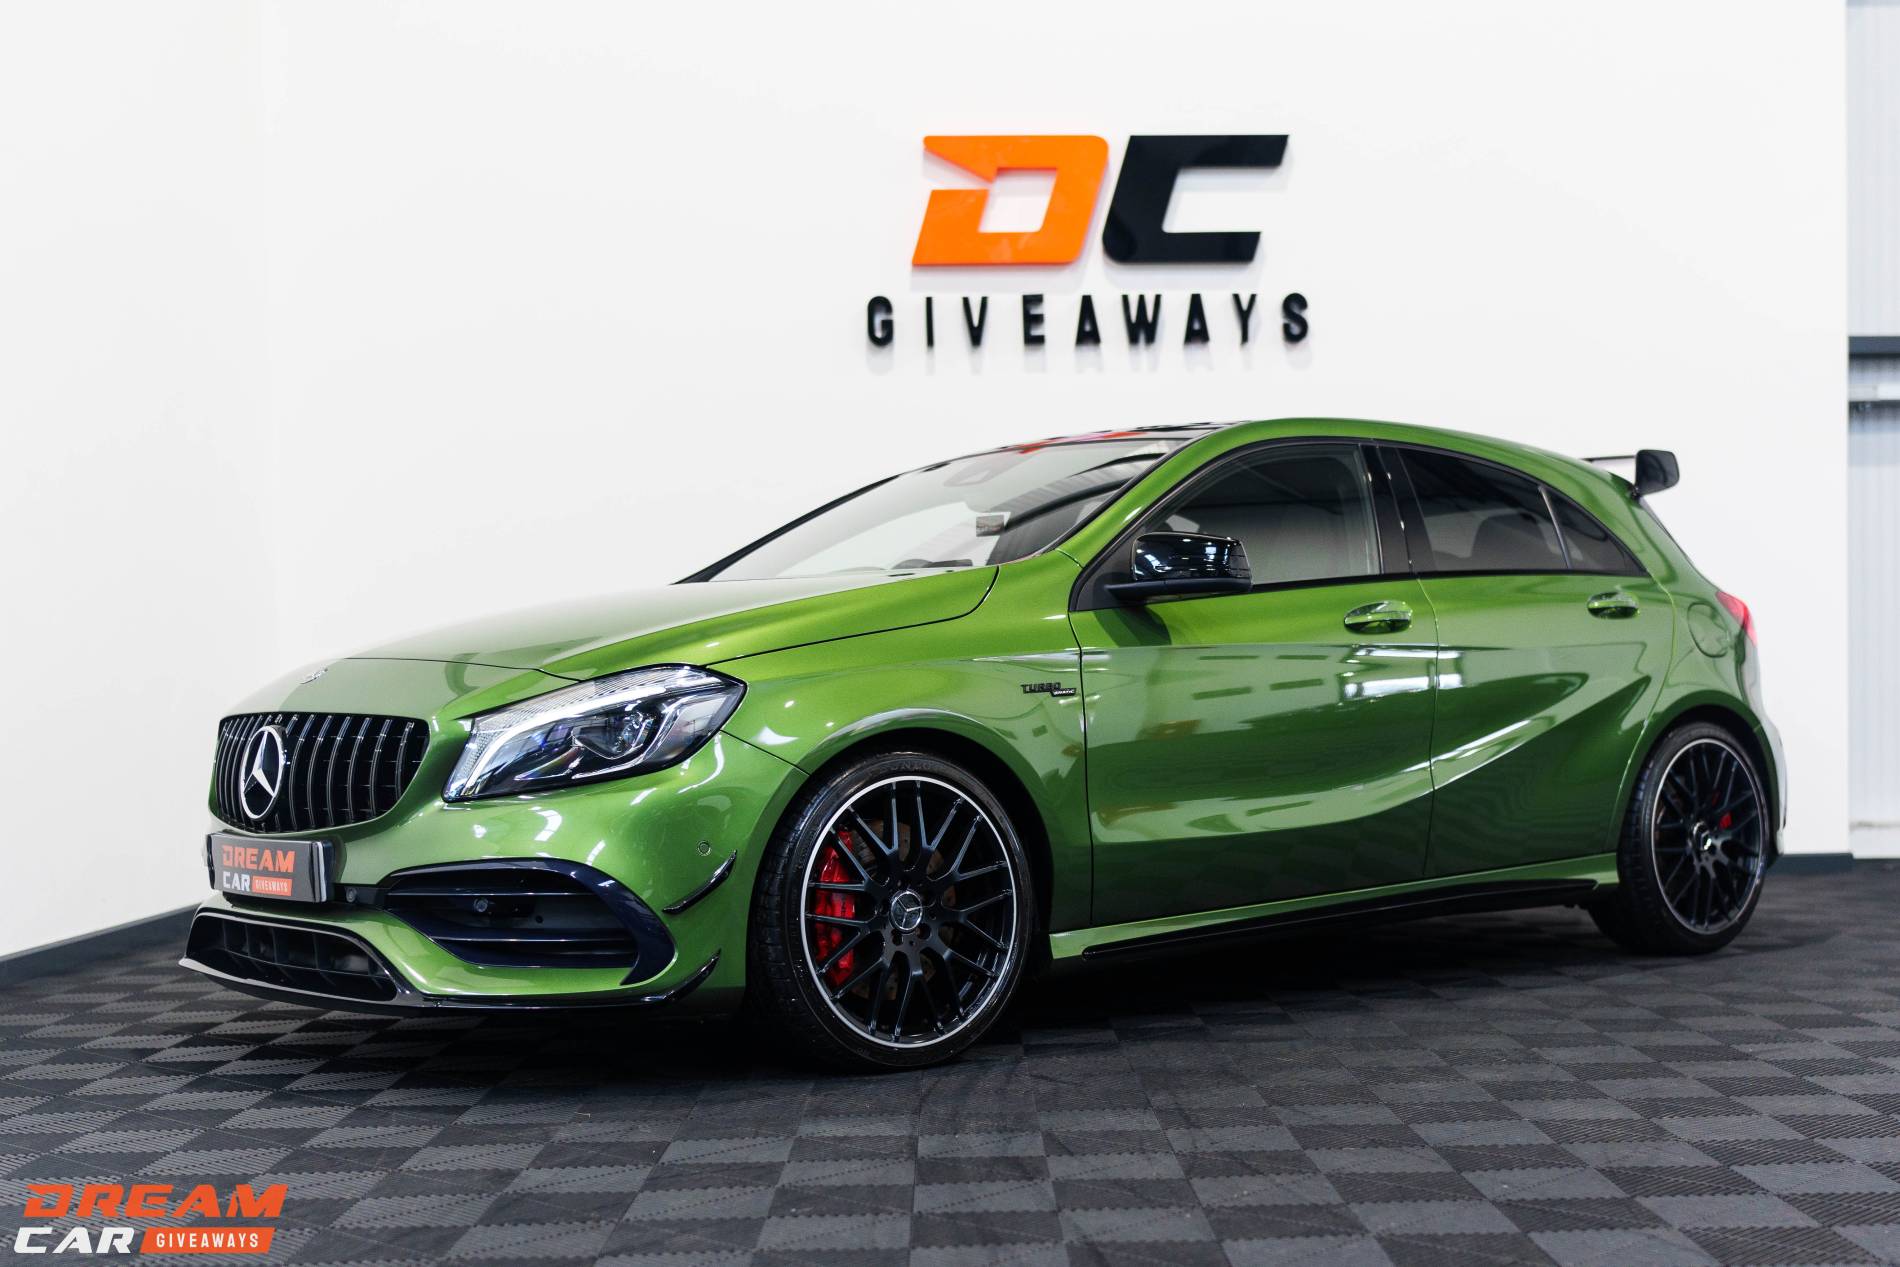 Win This Mercedes-Benz A45 AMG or £18,000 Tax Free - Only 999 Entries